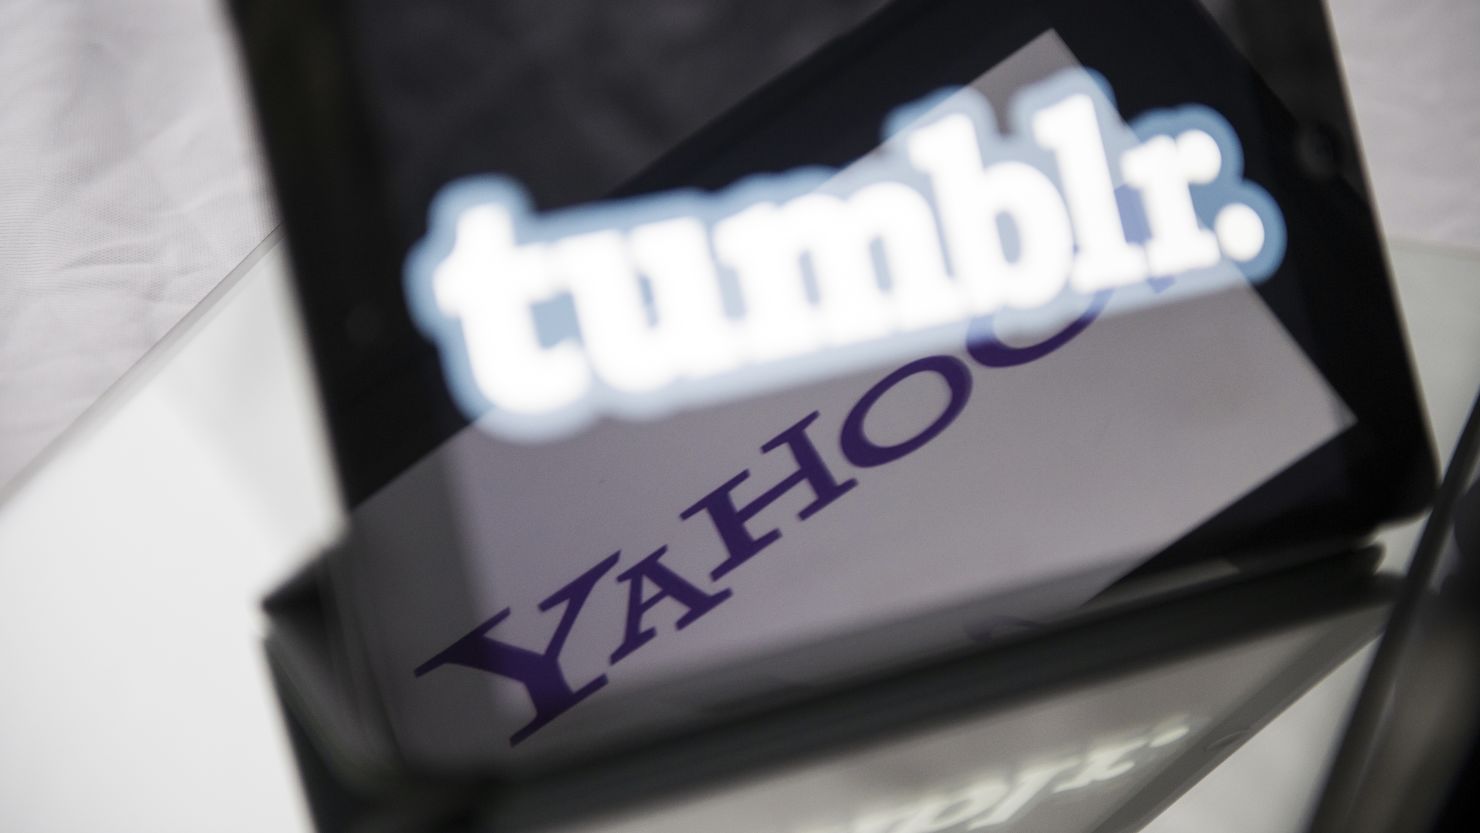 Popular blogging platform Tumblr, now owned by Yahoo, is asking iOS users to reset their passwords.